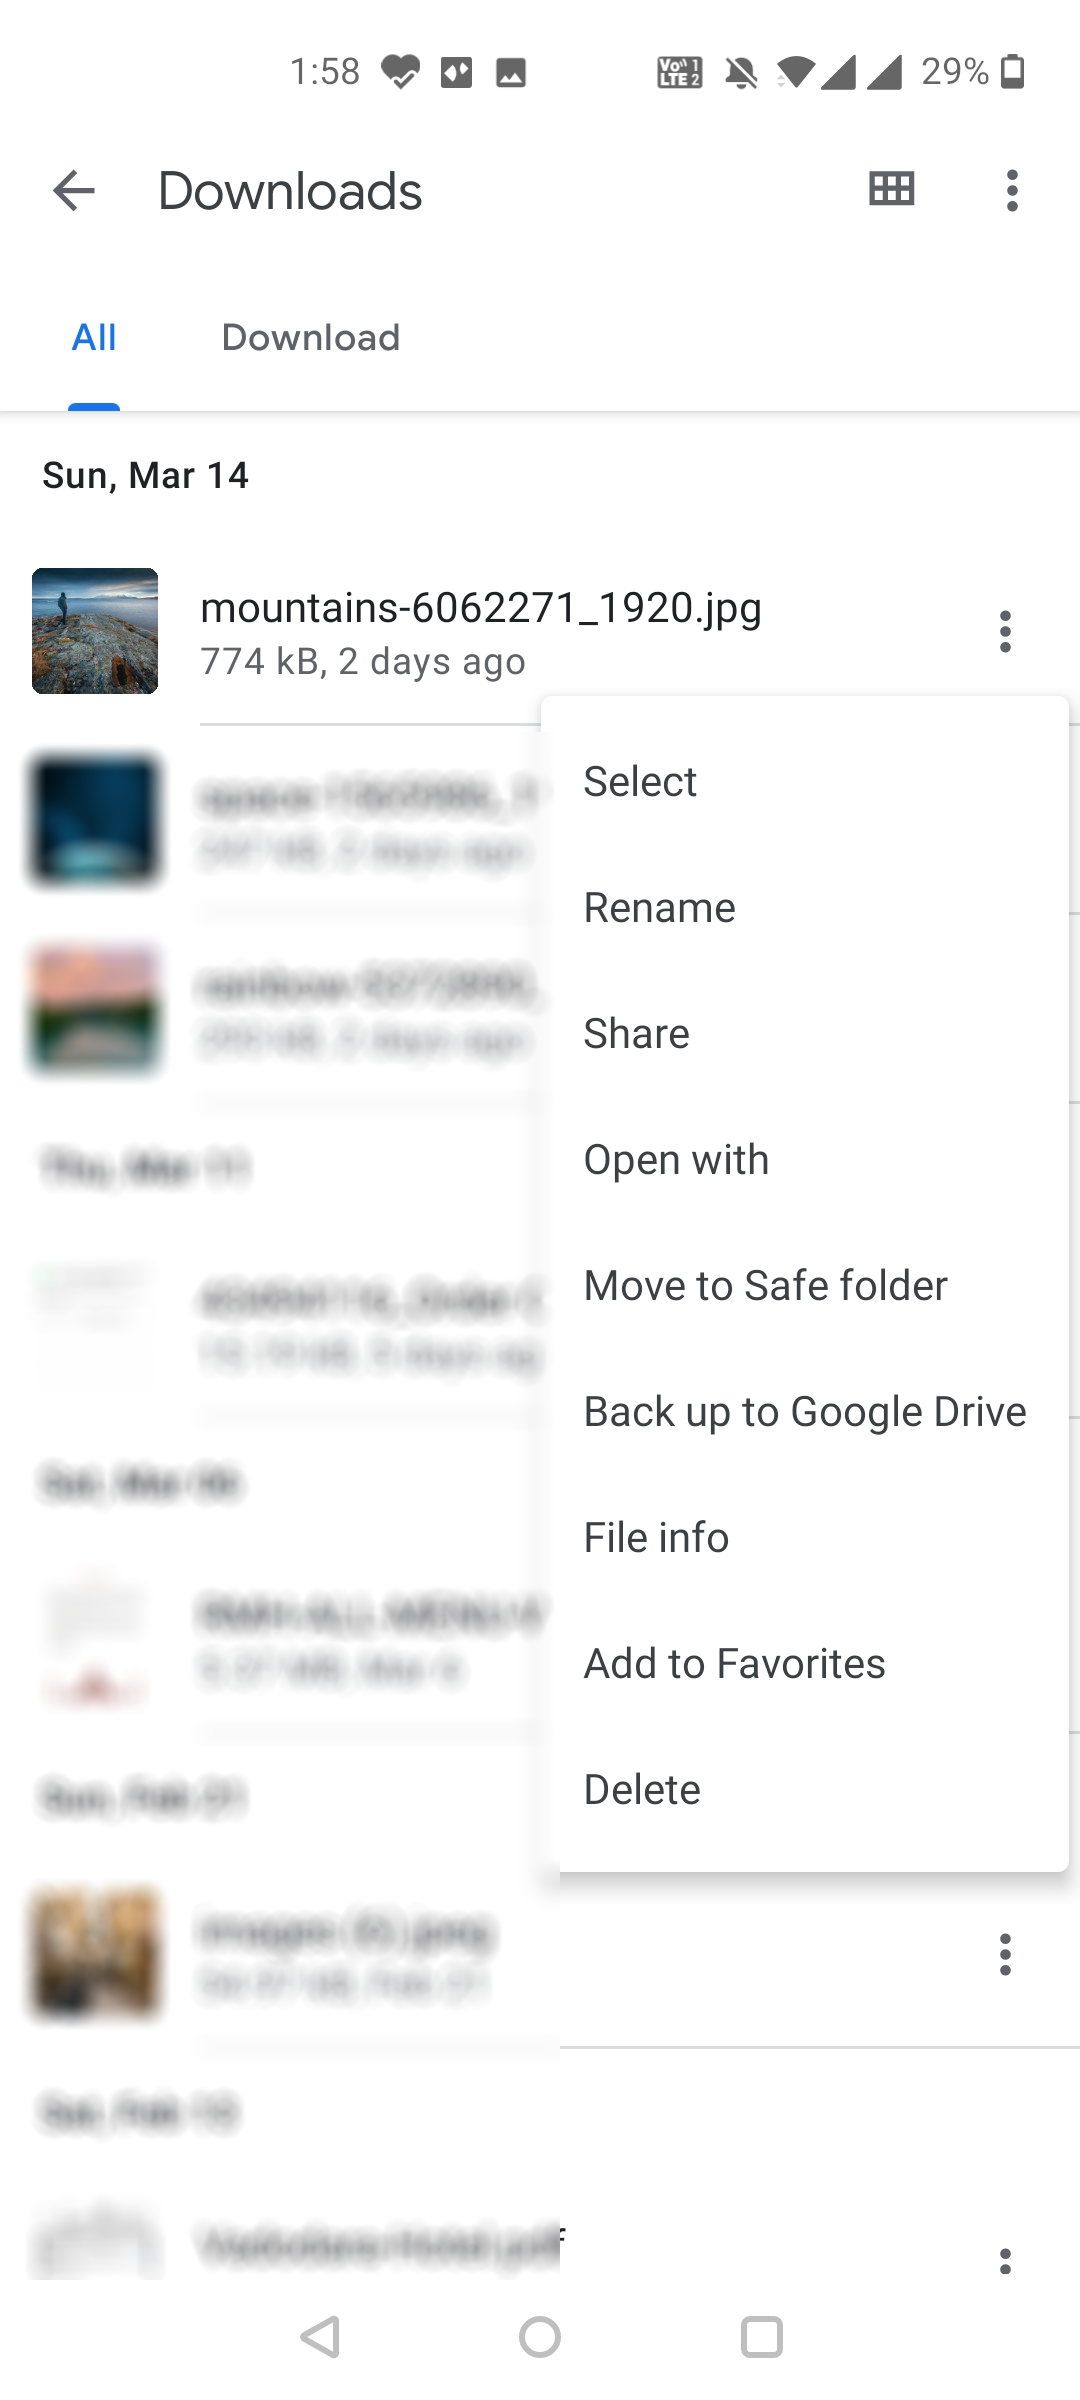 Add files to Favorites